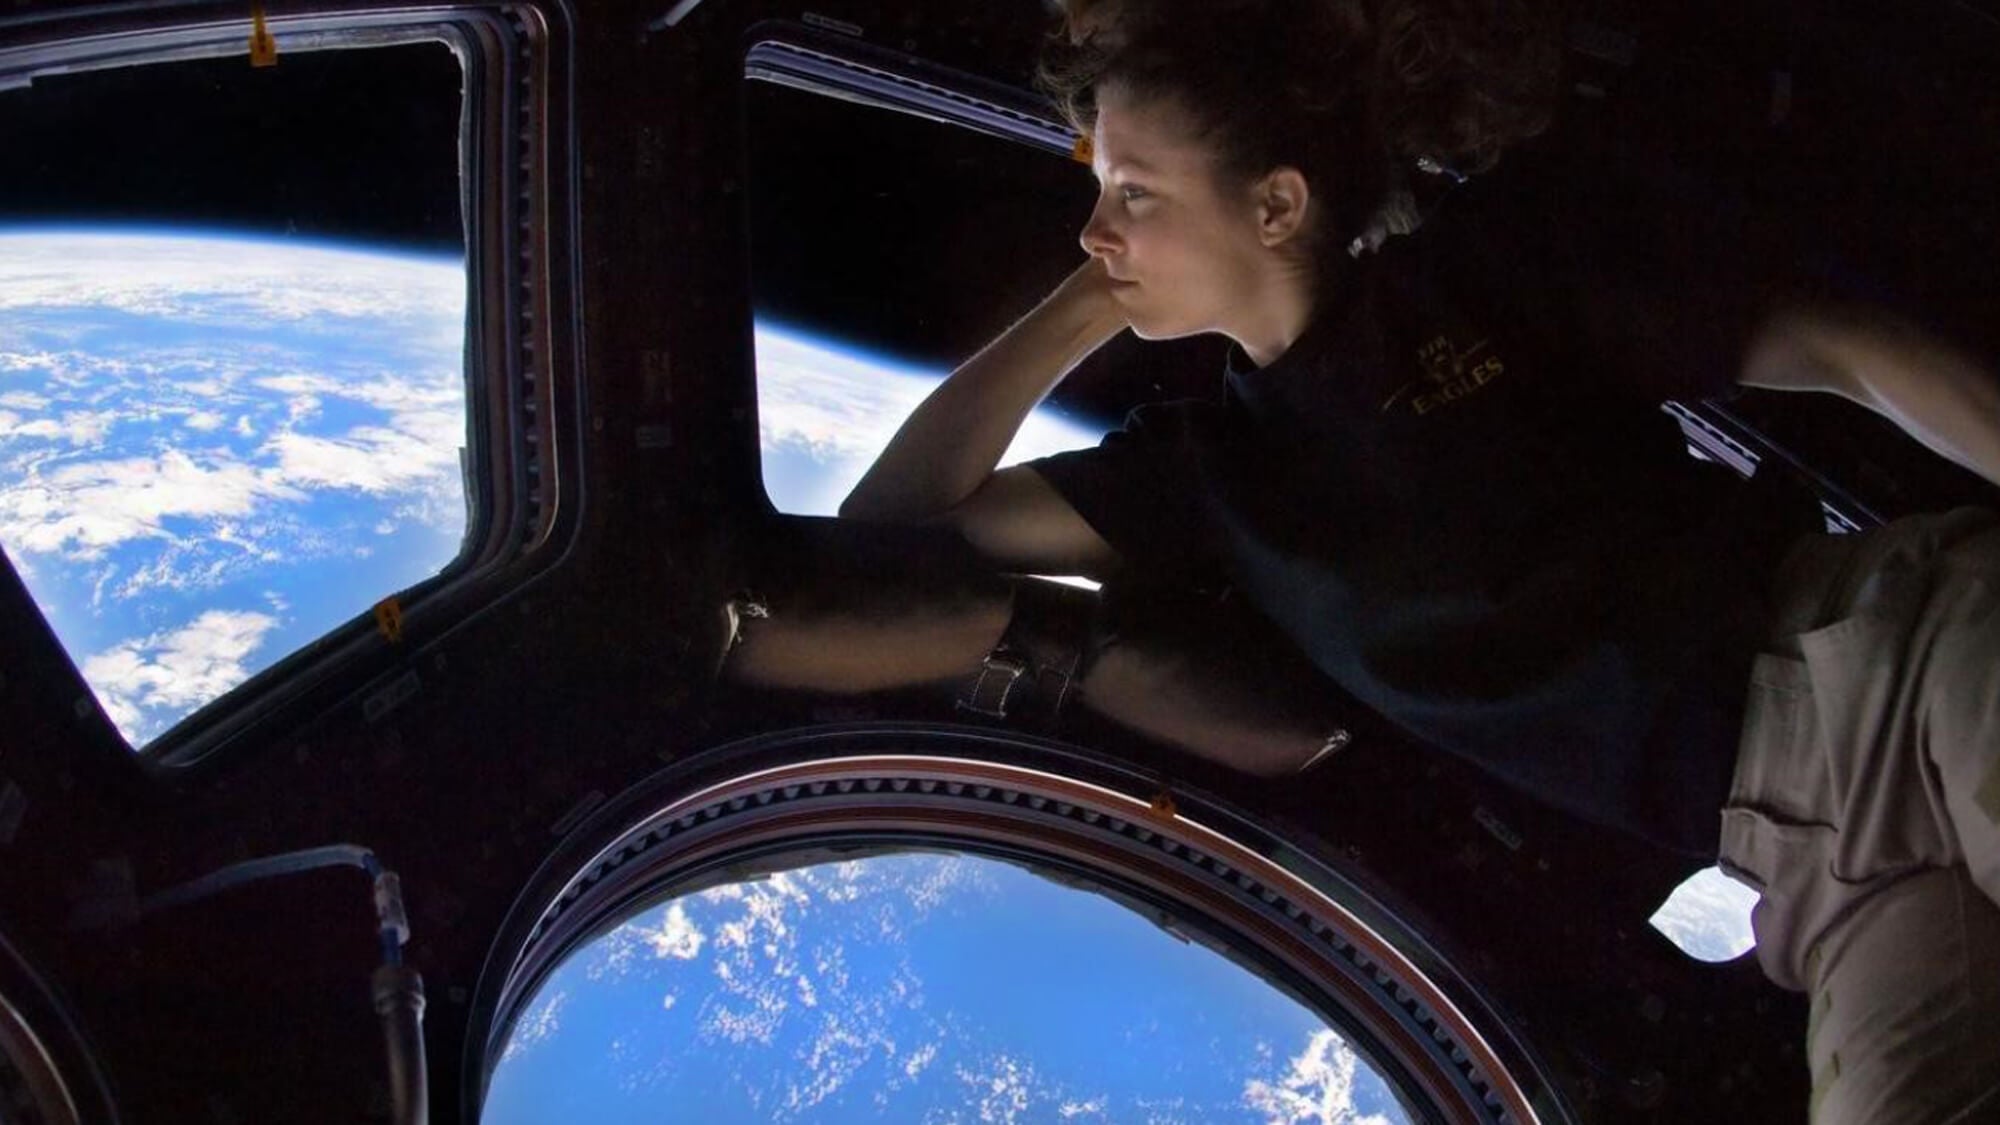 Tracy Caldwell Dyson (Ph.D. Chemistry, ’97) enjoys the view from the International Space Station cupola on her third trip to space as a NASA astronaut. (Photo credit: NASA)